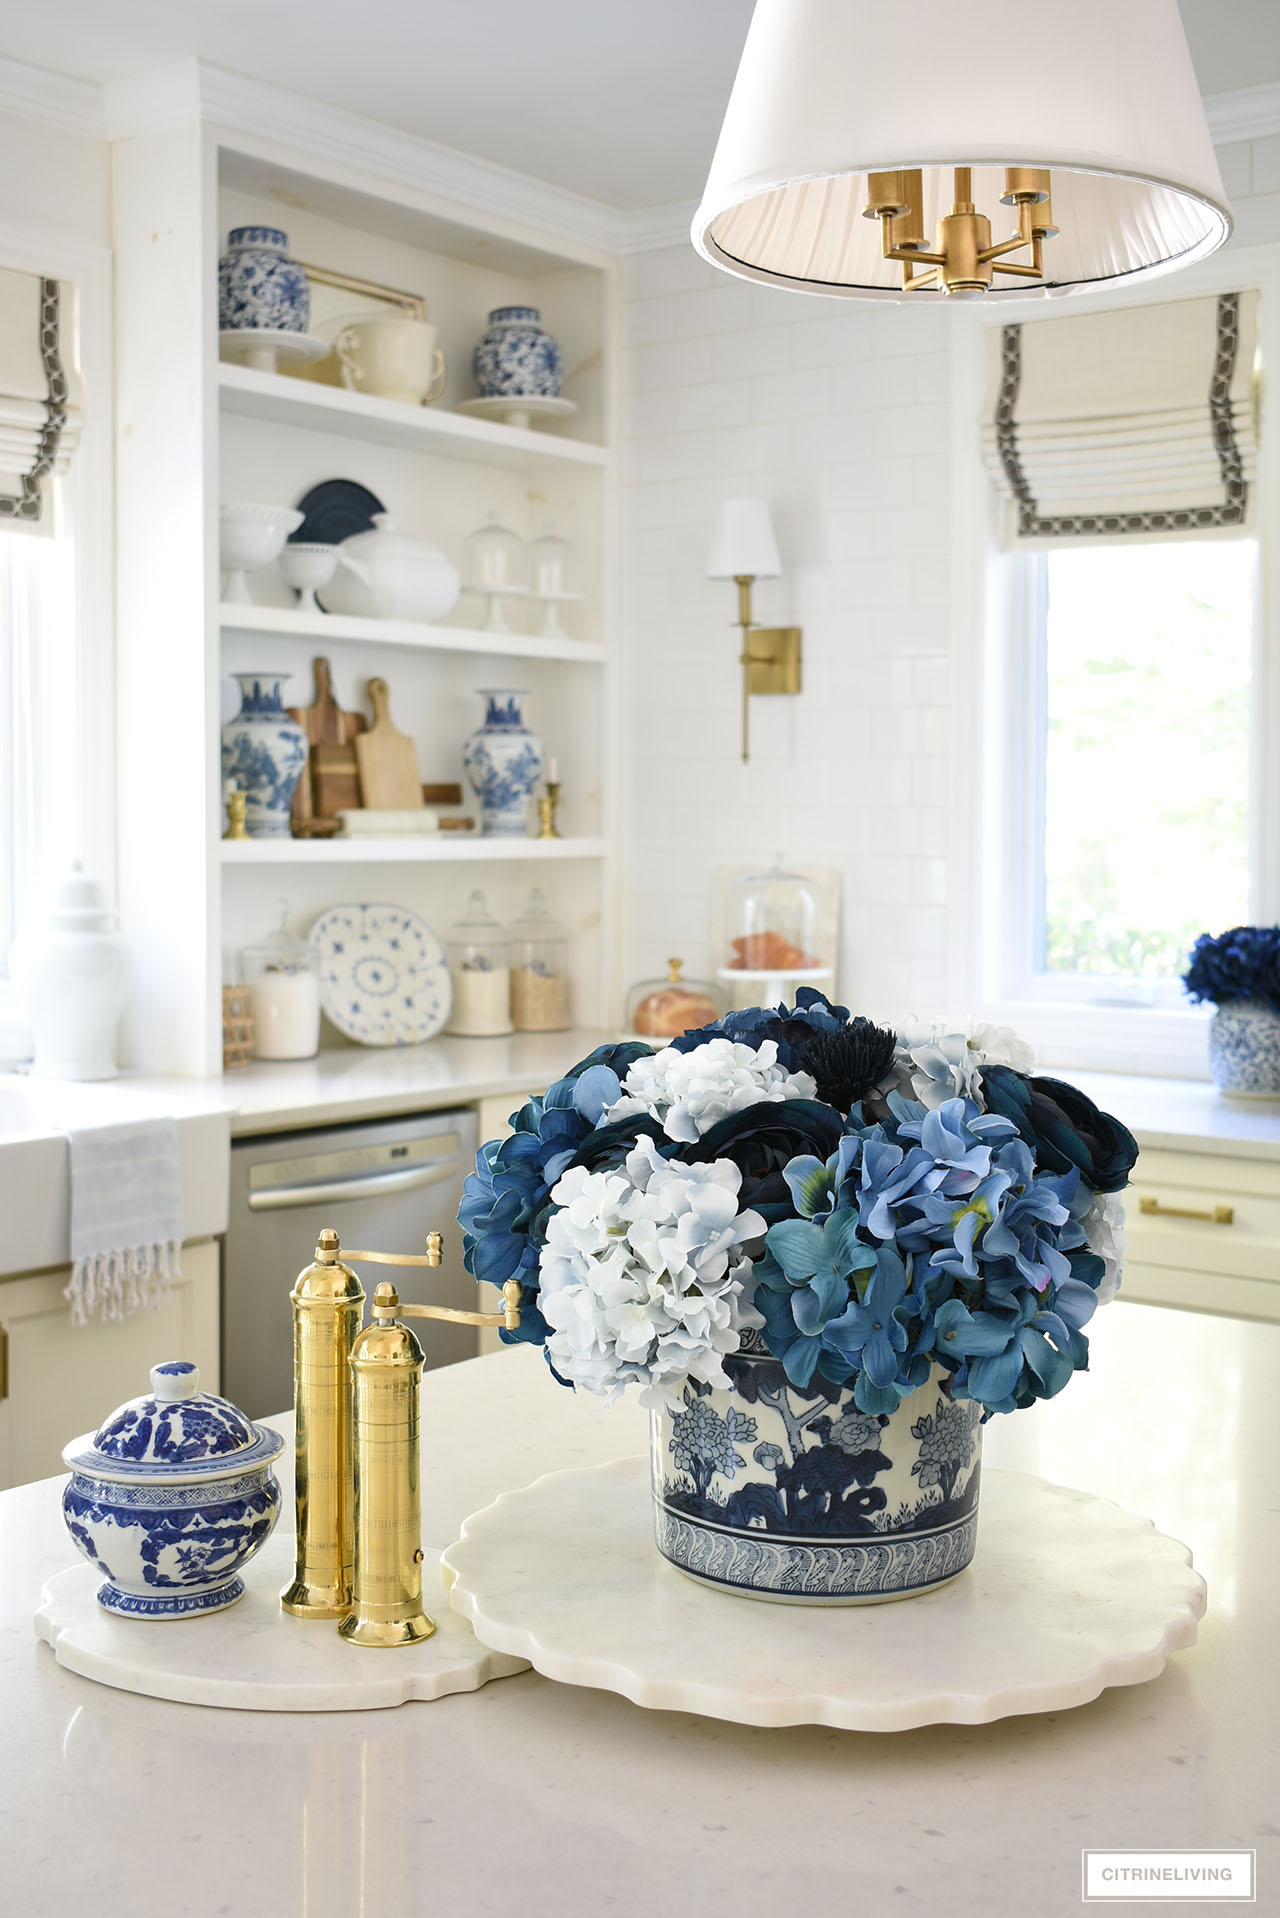 FALL KITCHEN DECOR IN BLUE, WHITE + GOLD - CITRINELIVING